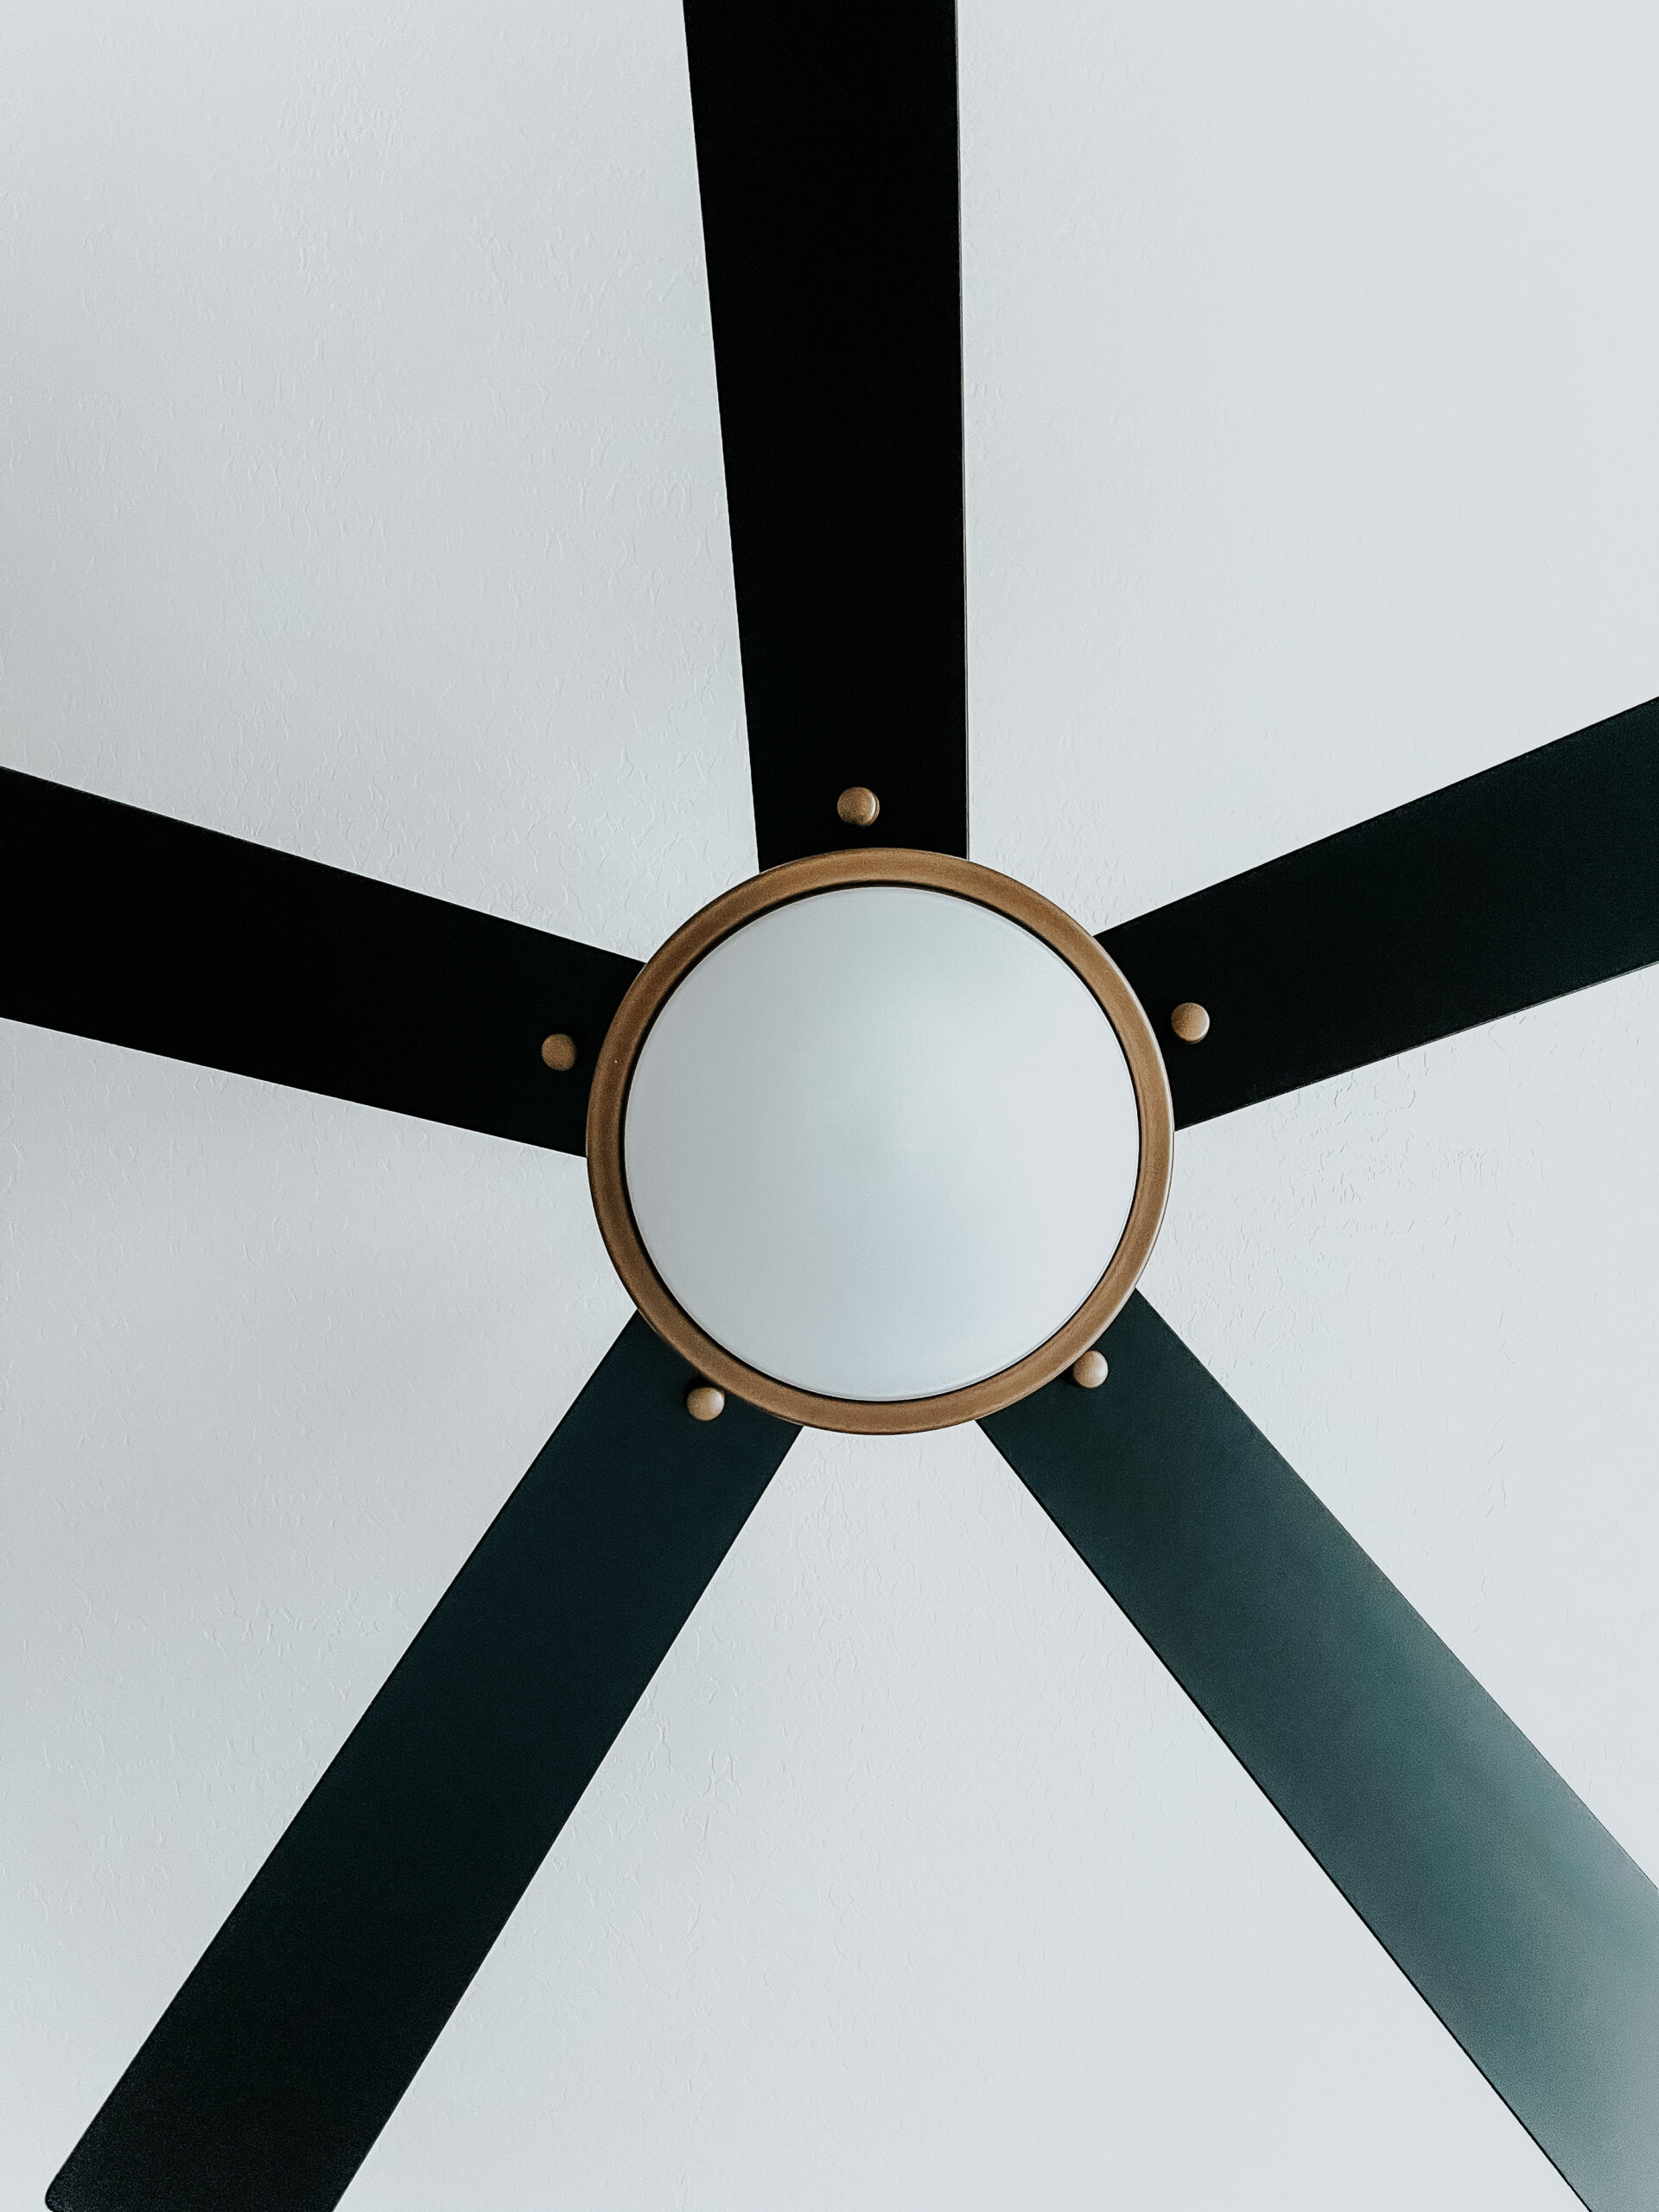 kichler satin black ceiling fan with gold detail and LED light - This is our Bliss - primary bedroom ceiling fan update